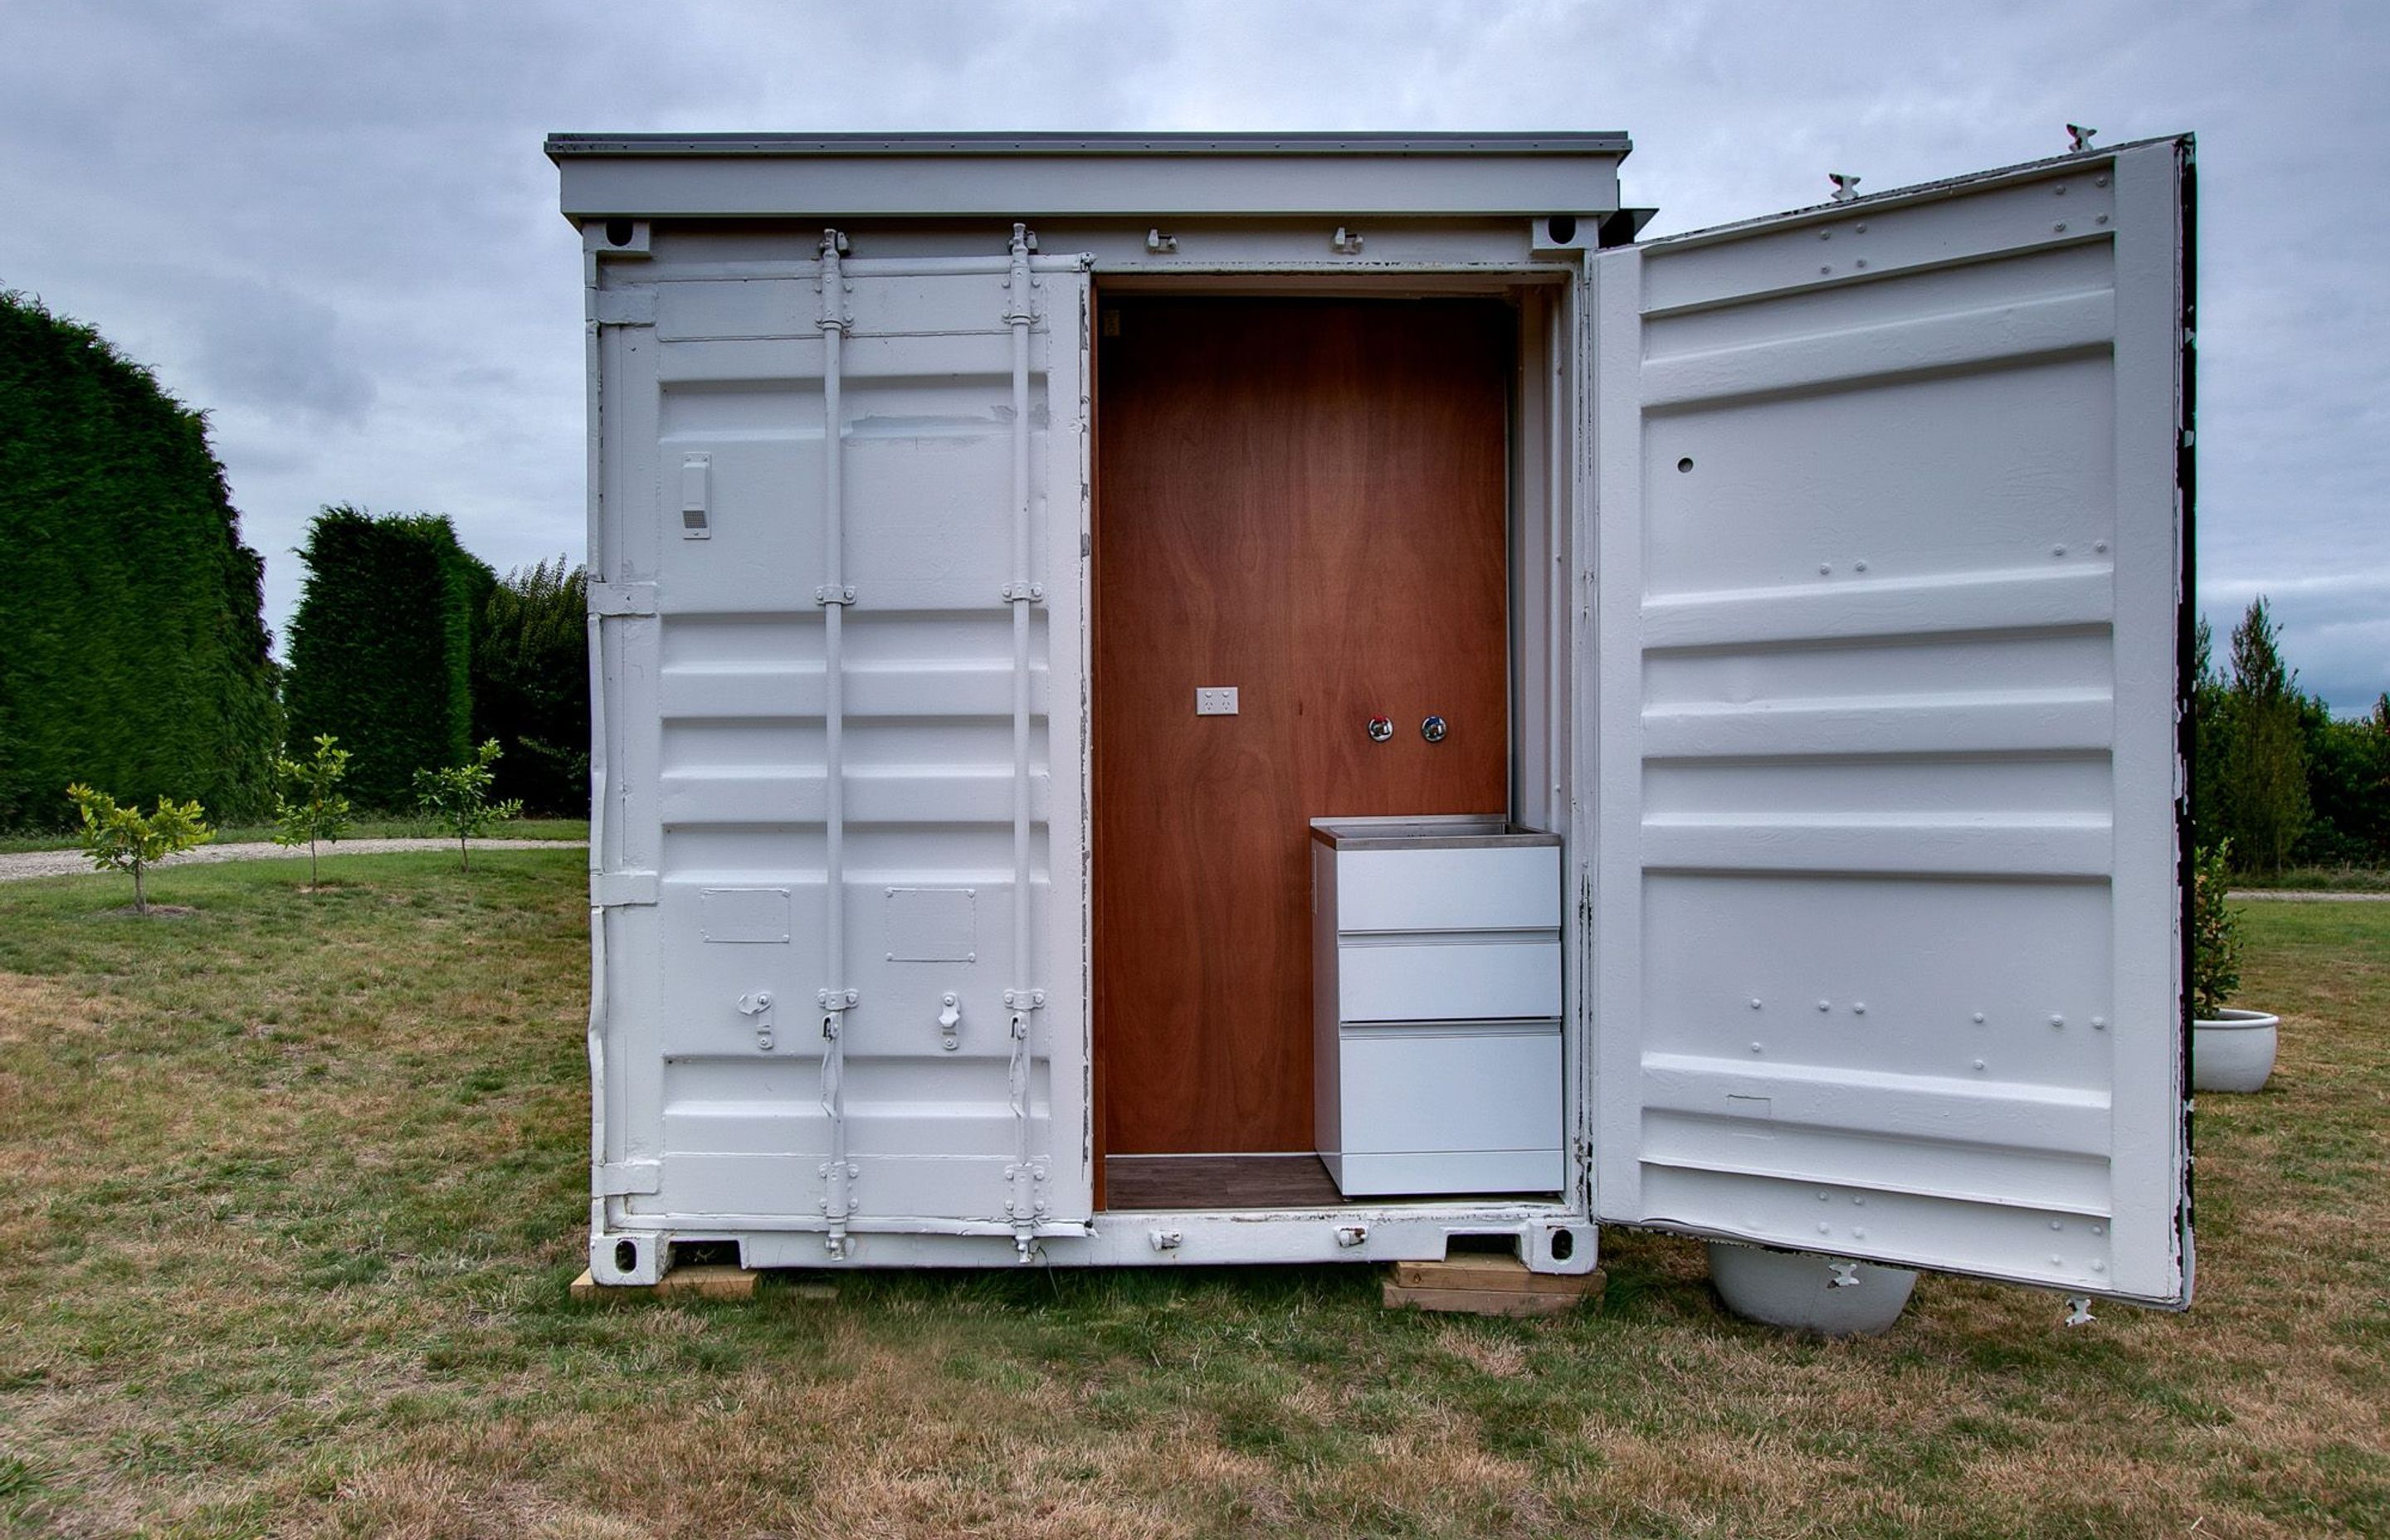 The doors of the existing container open up a laundry area to the exterior.